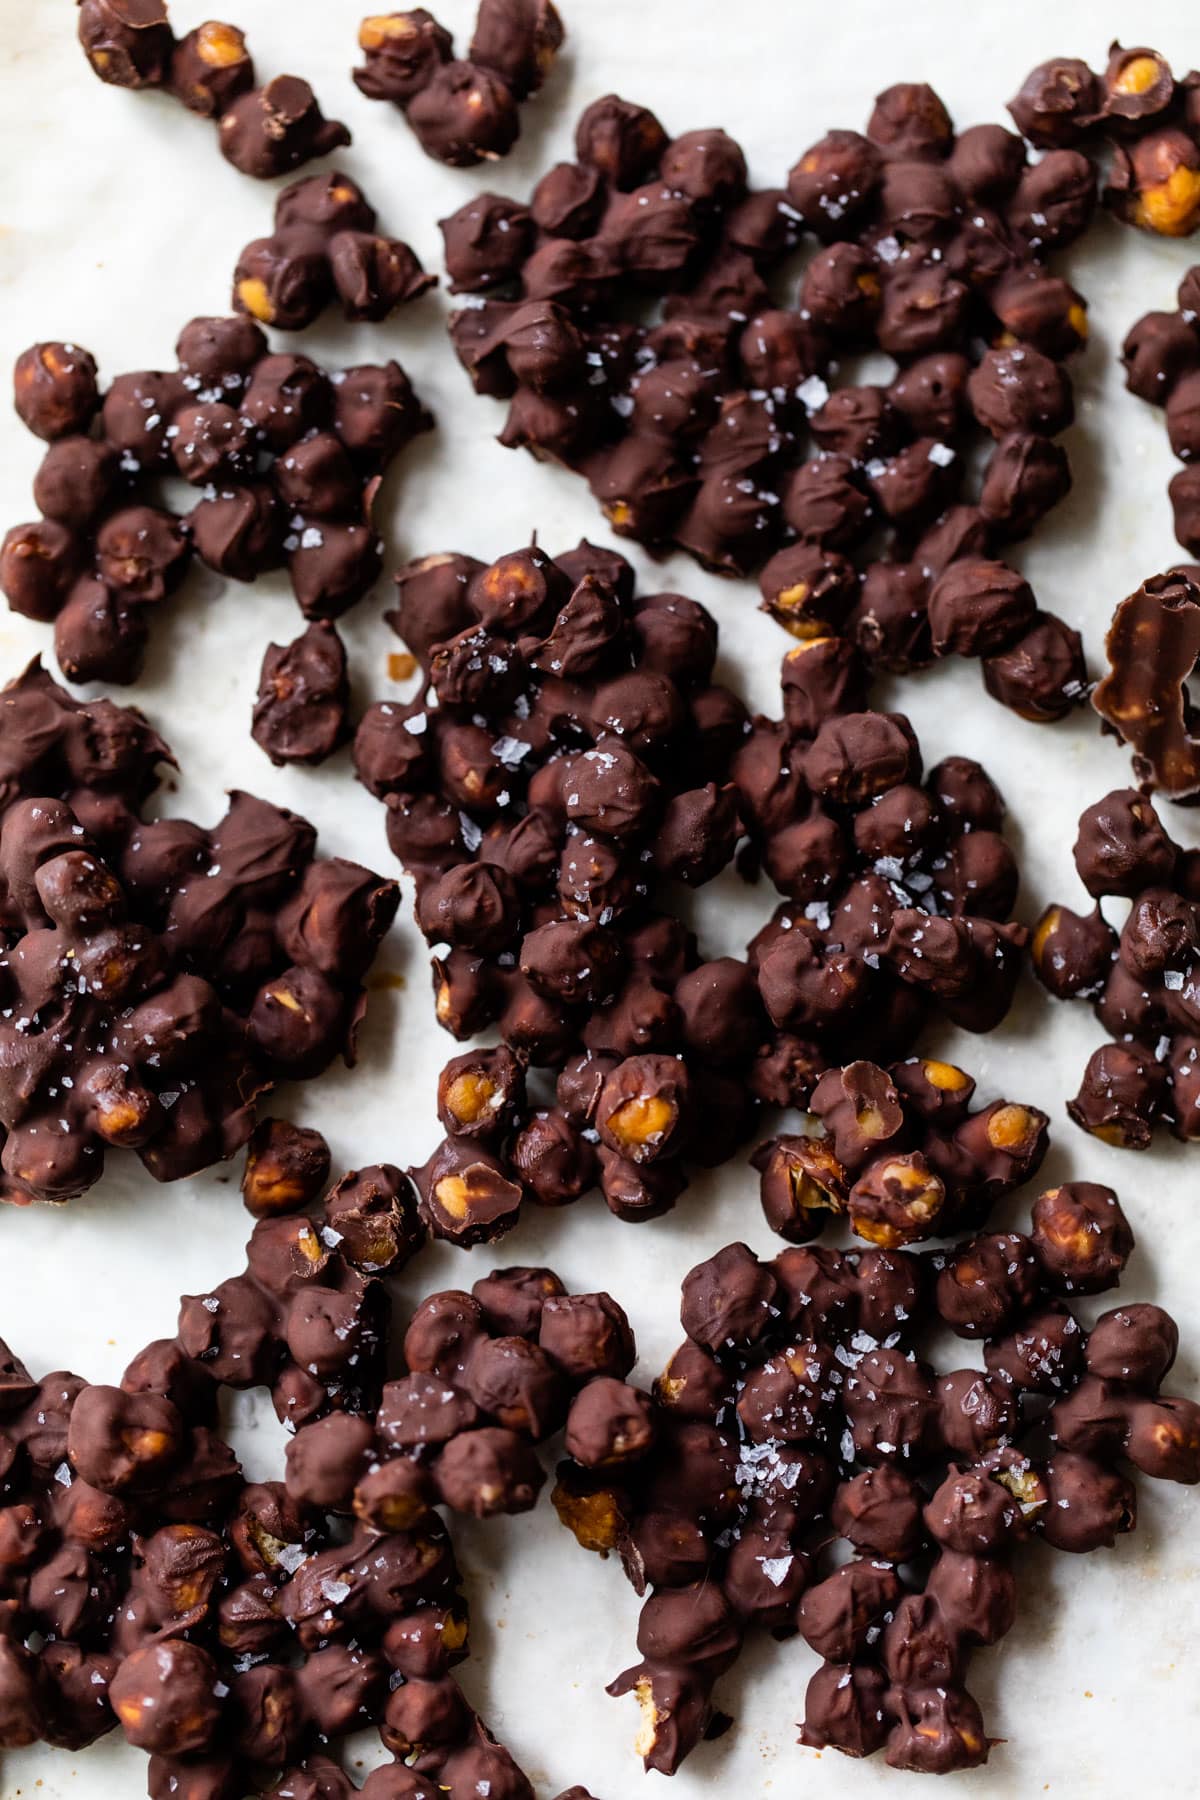 clumps of chocolate covered chickpeas on parchment paper